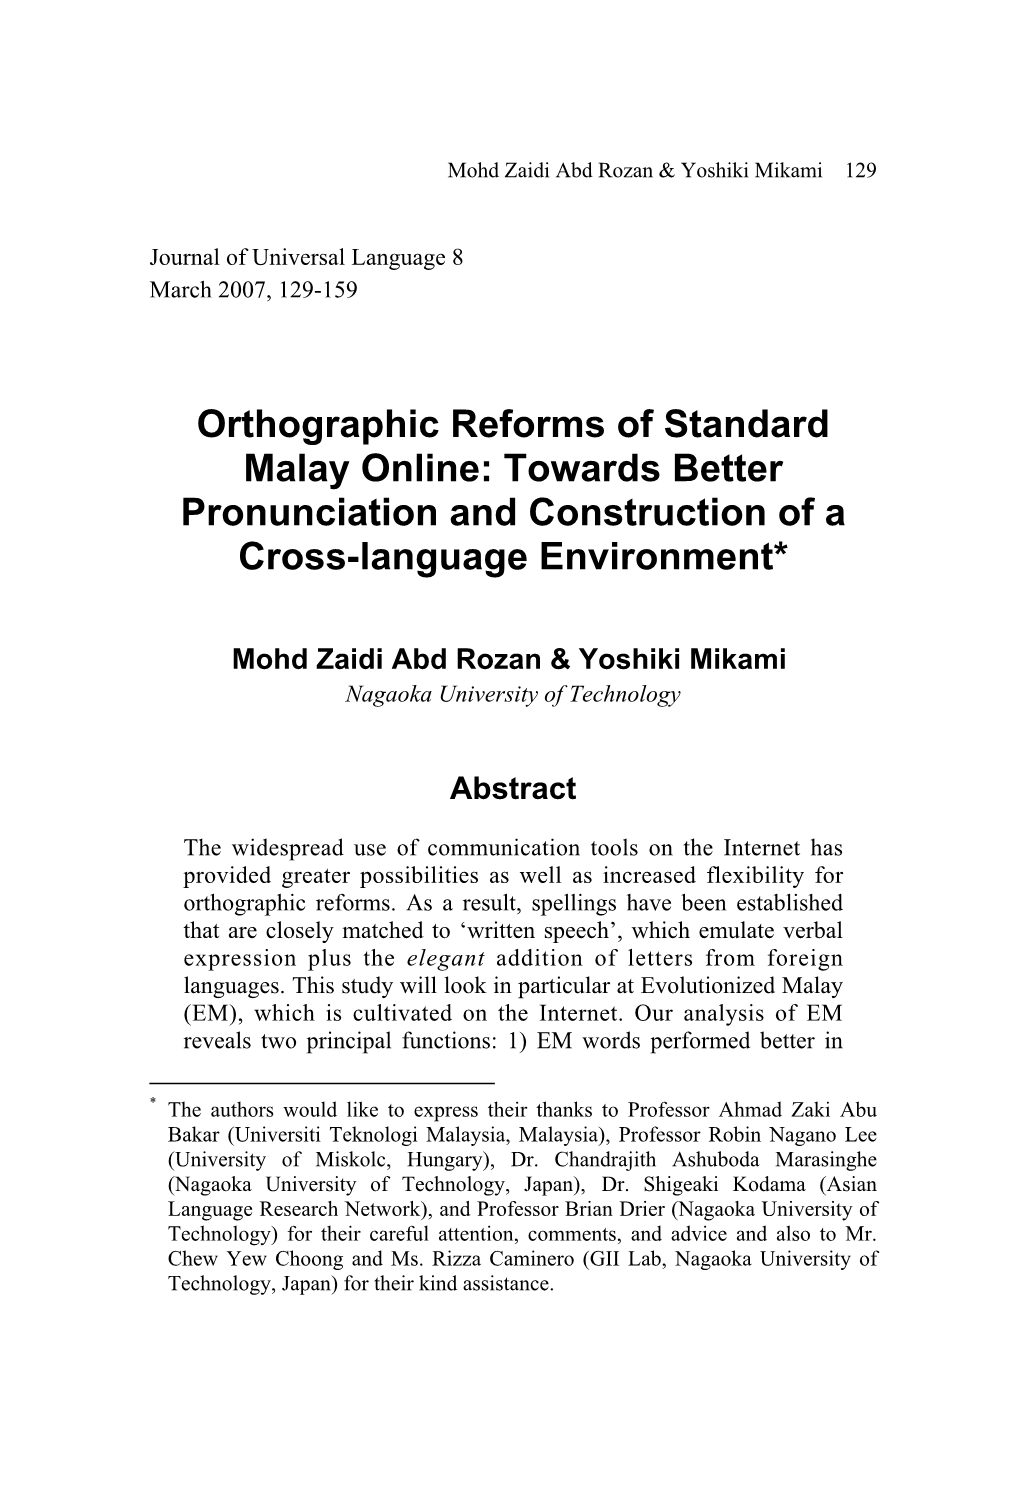 Orthographic Reforms of Standard Malay Online: Towards Better Pronunciation and Construction of a Cross-Language Environment*